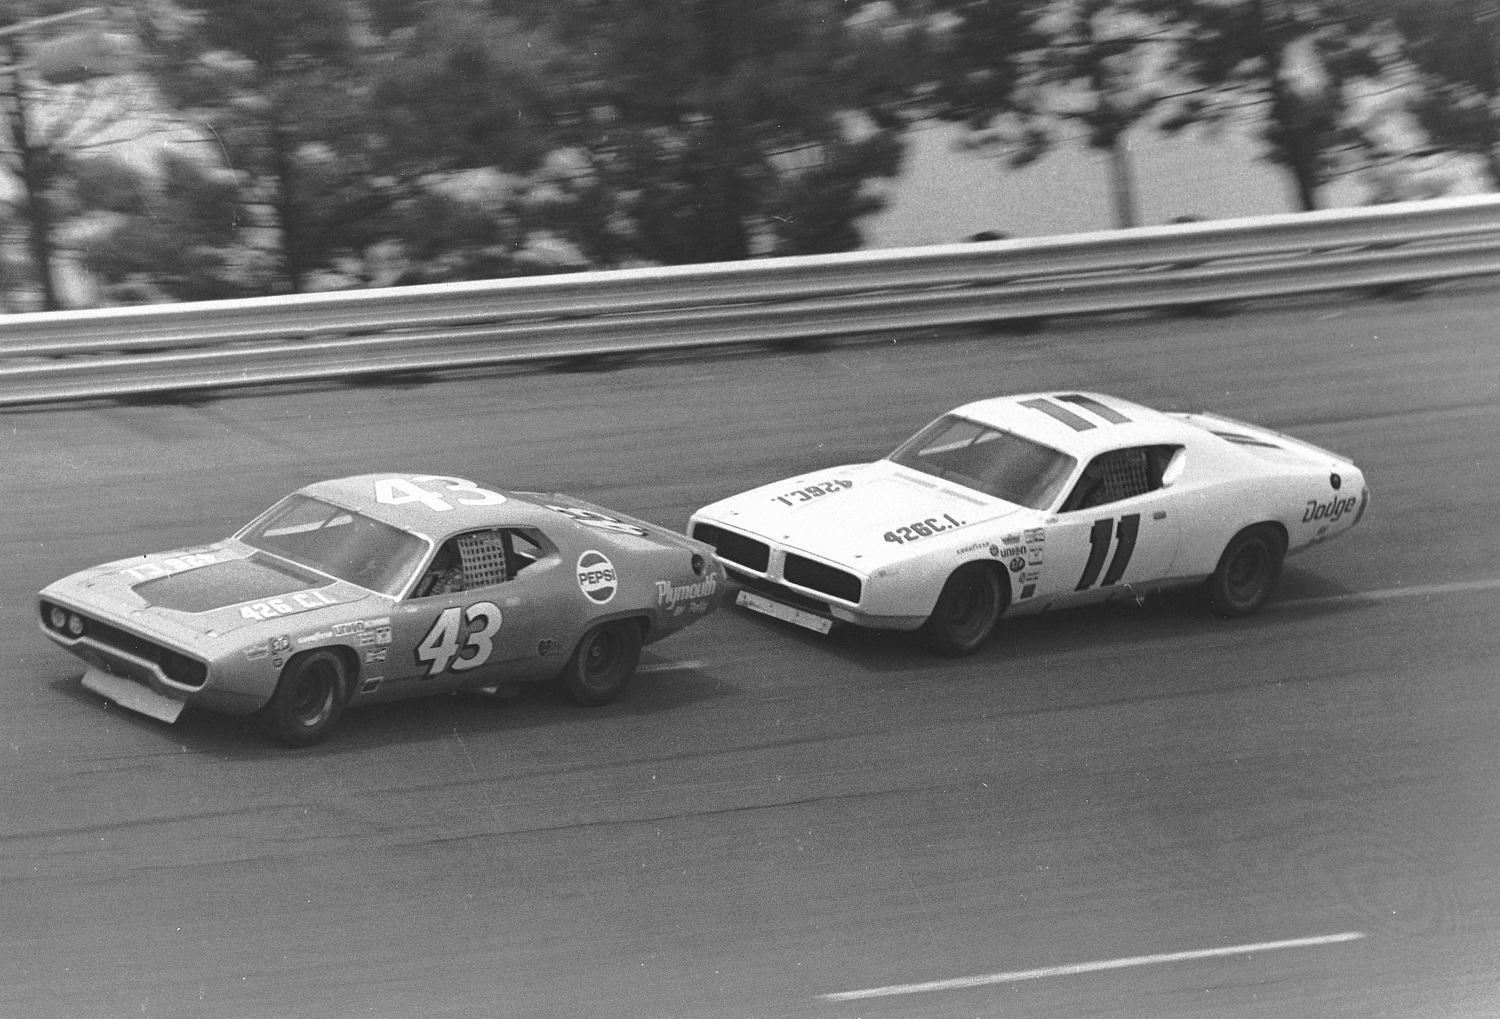 Richard Petty leads teammate Buddy Baker during the Dixie 500 NASCAR Cup race at Atlanta International Raceway in 1971, the final year of extended schedules and multiple short tracks. | ISC Images & Archives via Getty Images